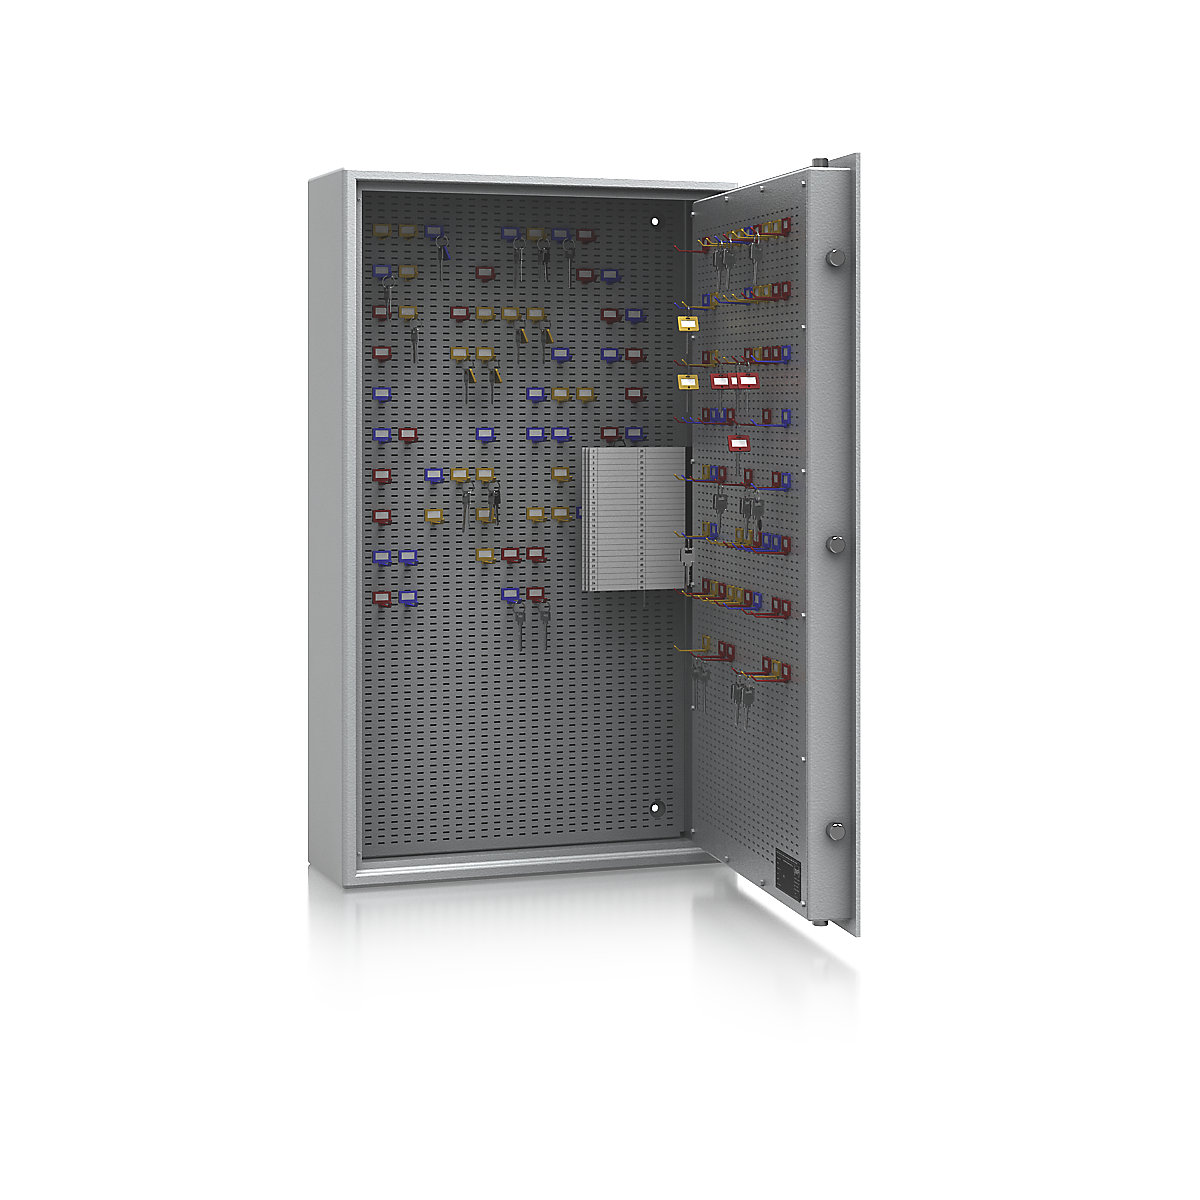 Key safe, security level A and Euro standard S1, light grey, HxWxD 1000 x 600 x 200 mm, for up to 300 hooks-8